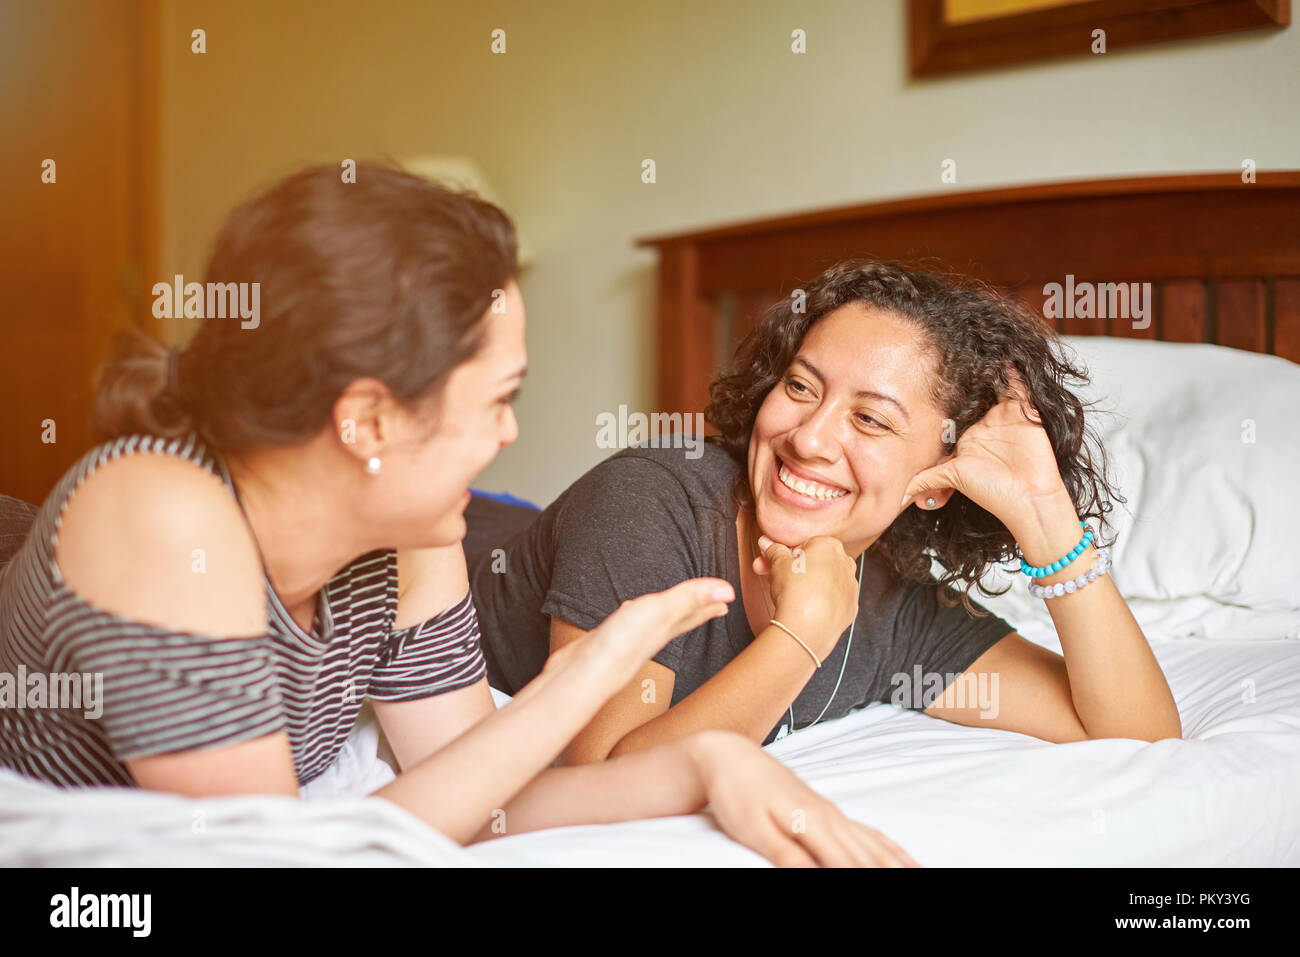 Two young woman talk on bed. Friendship of girls concept Stock Photo